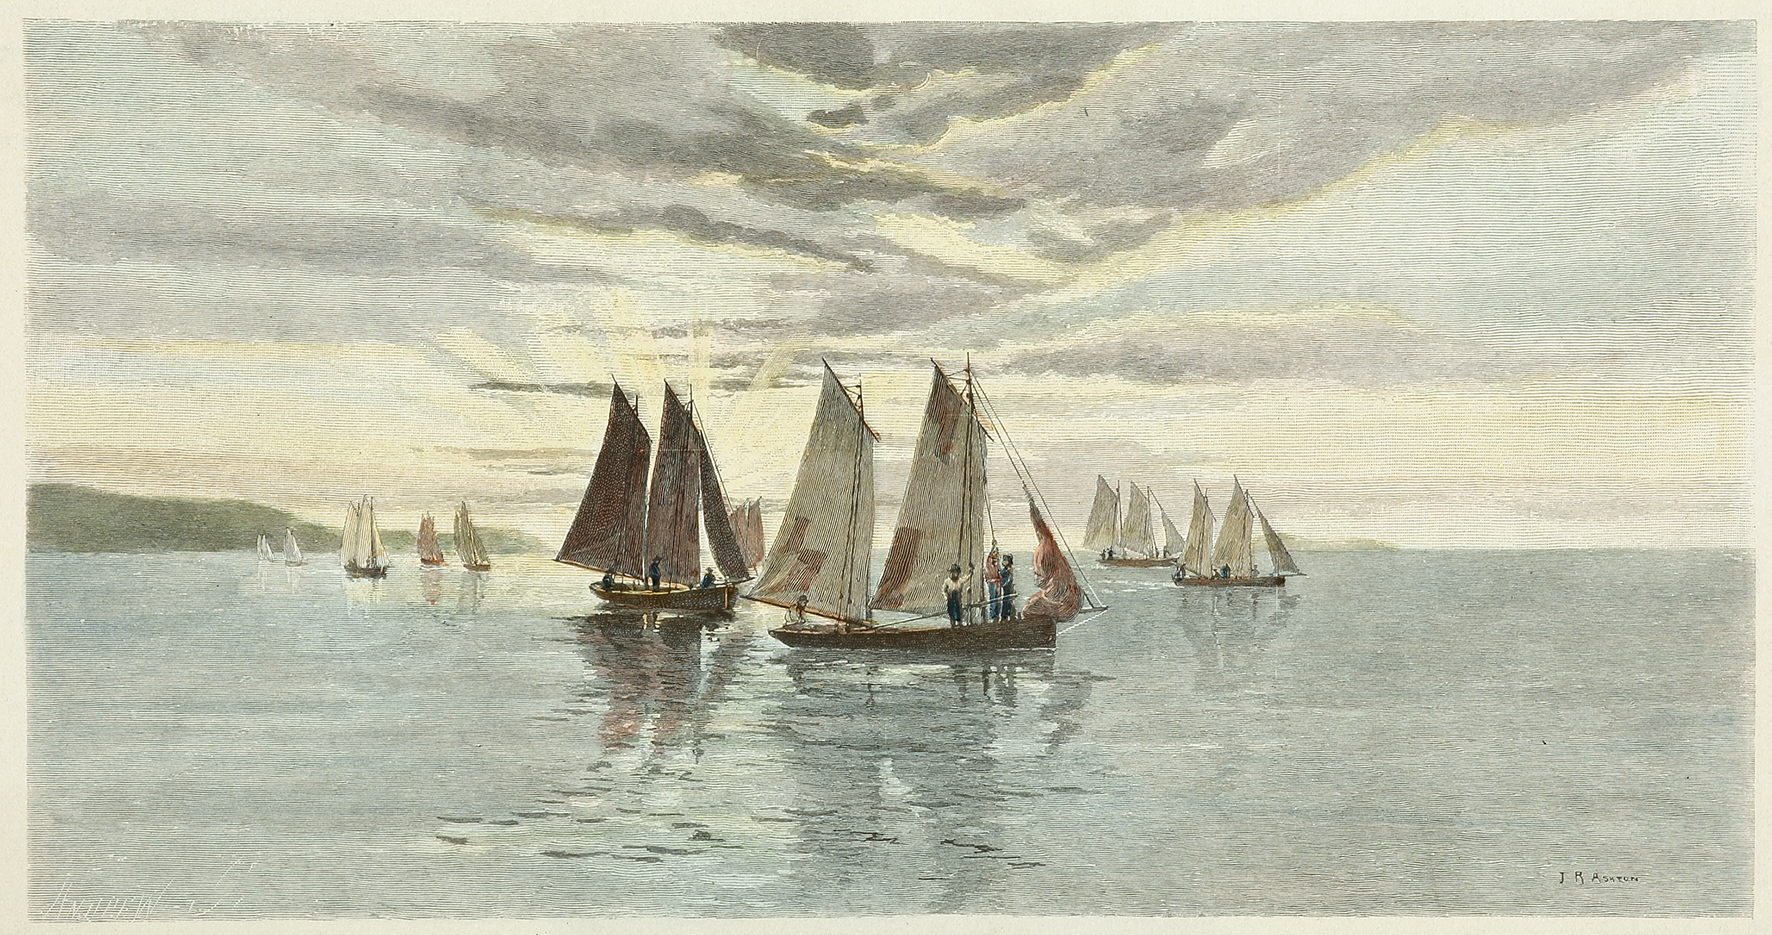 A Fleet of Pearl-Shellers, Gulf of Carpentaria - Antique View from 1886